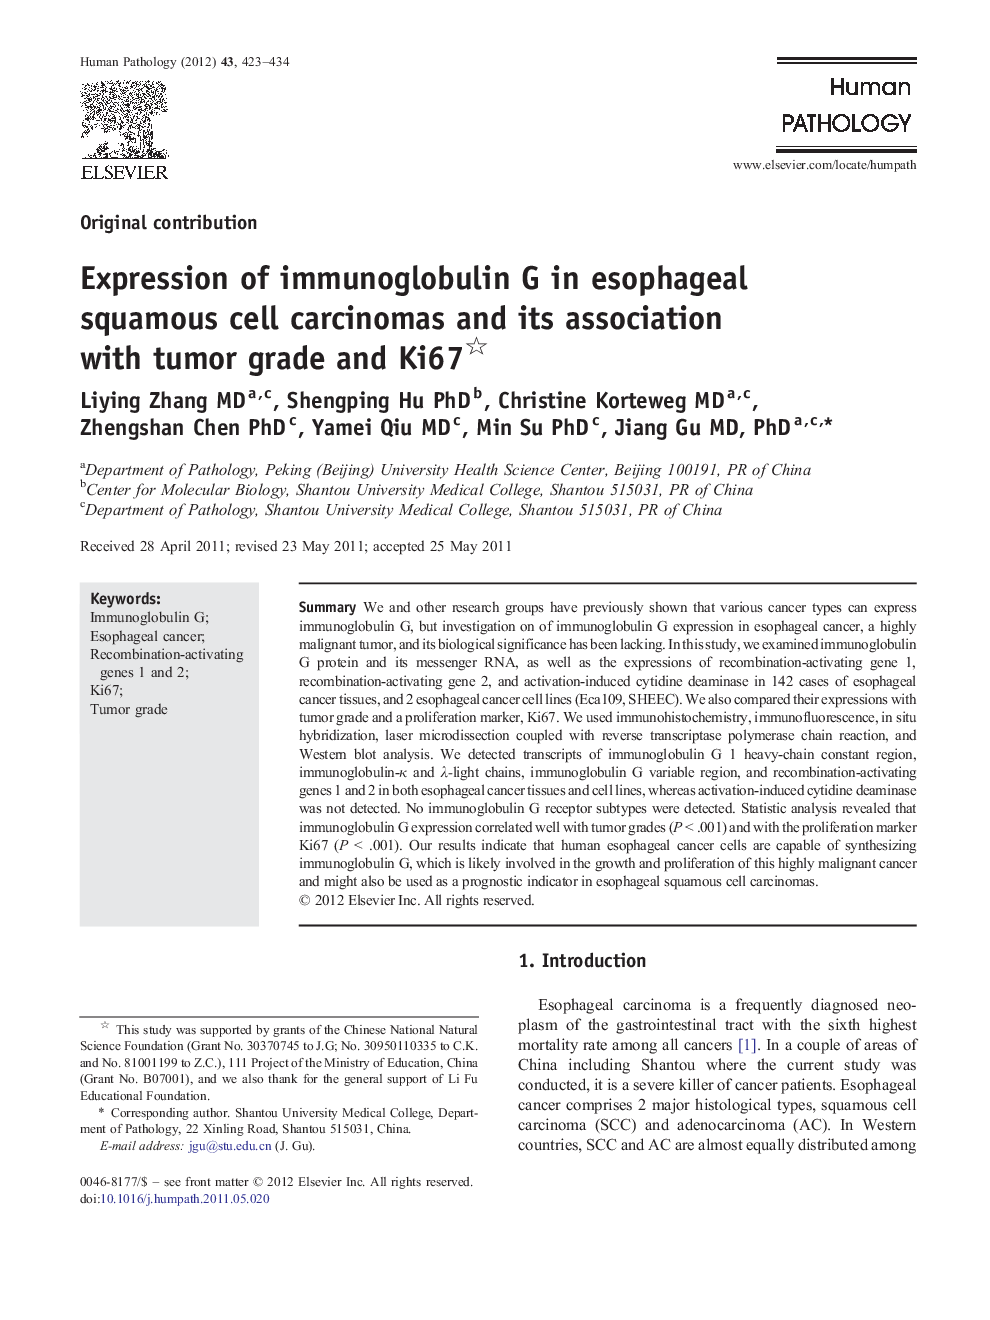 Expression of immunoglobulin G in esophageal squamous cell carcinomas and its association with tumor grade and Ki67